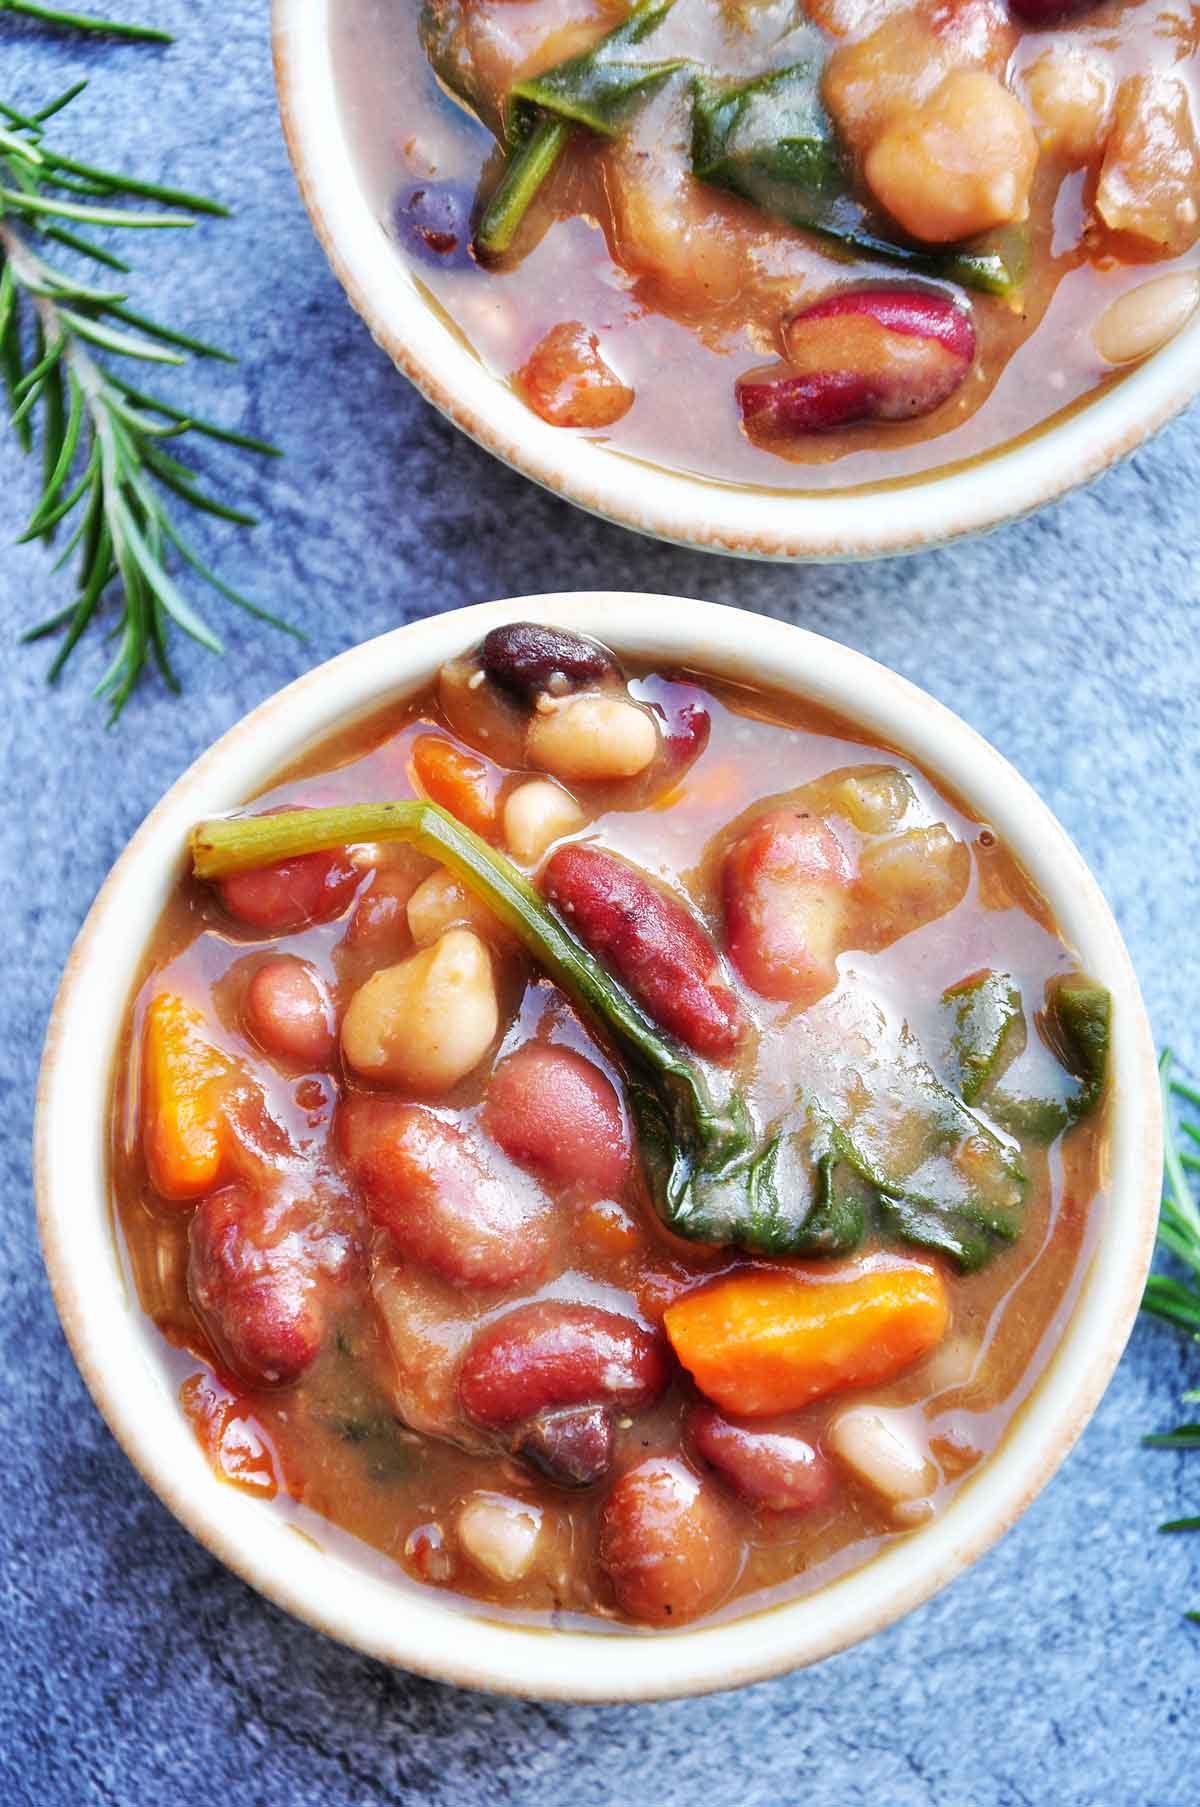 Mixed Beans Soup in a bowl.